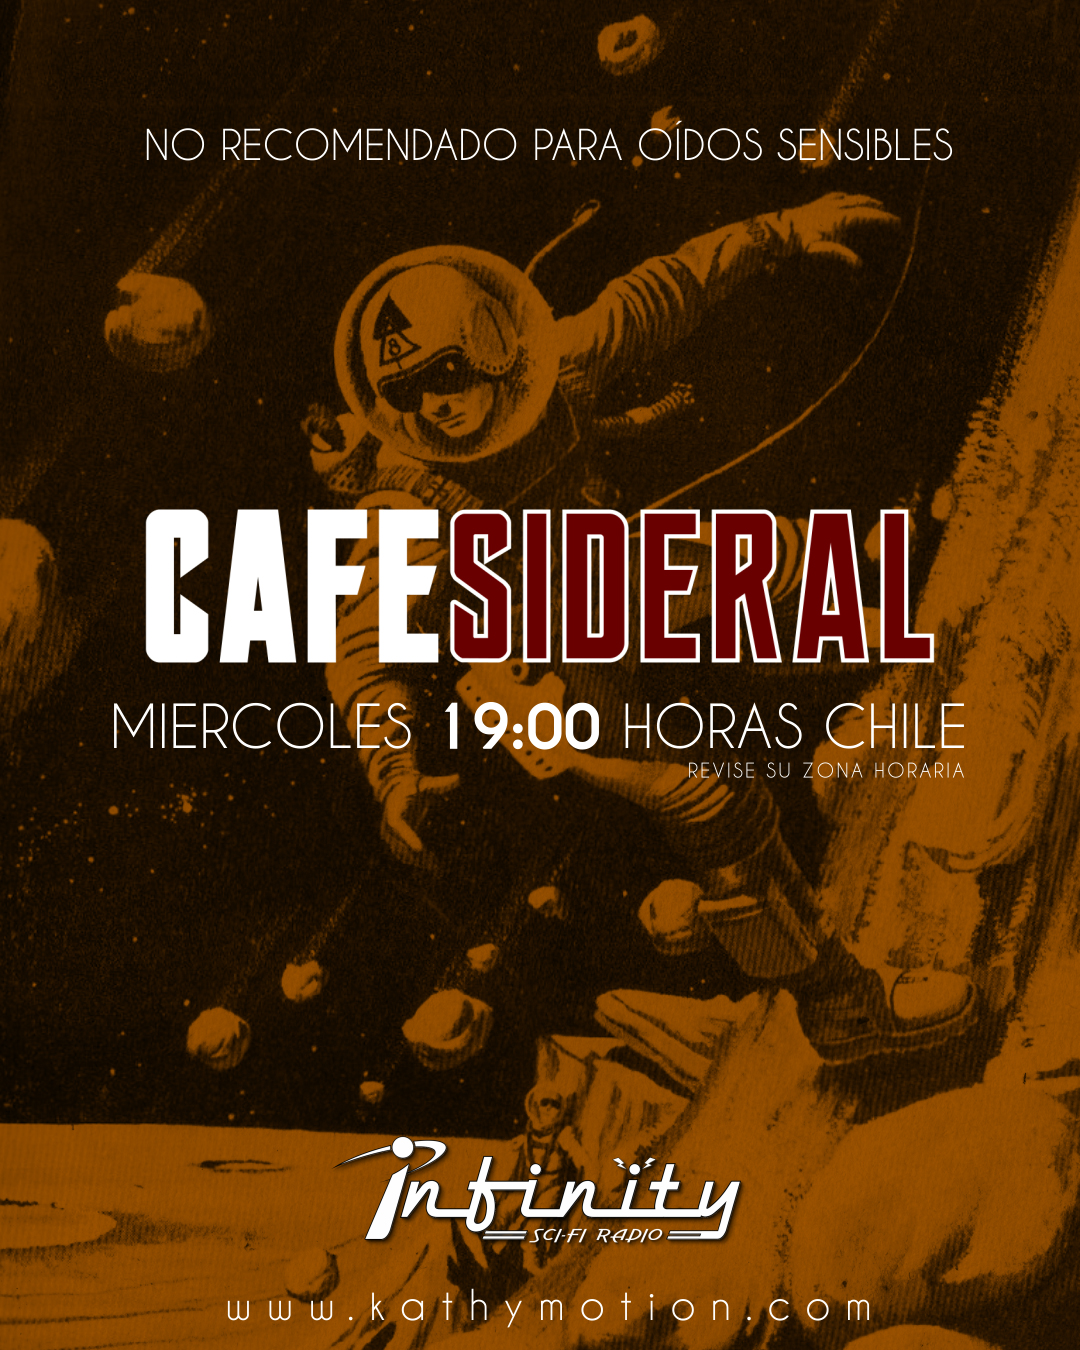 CafeSideral